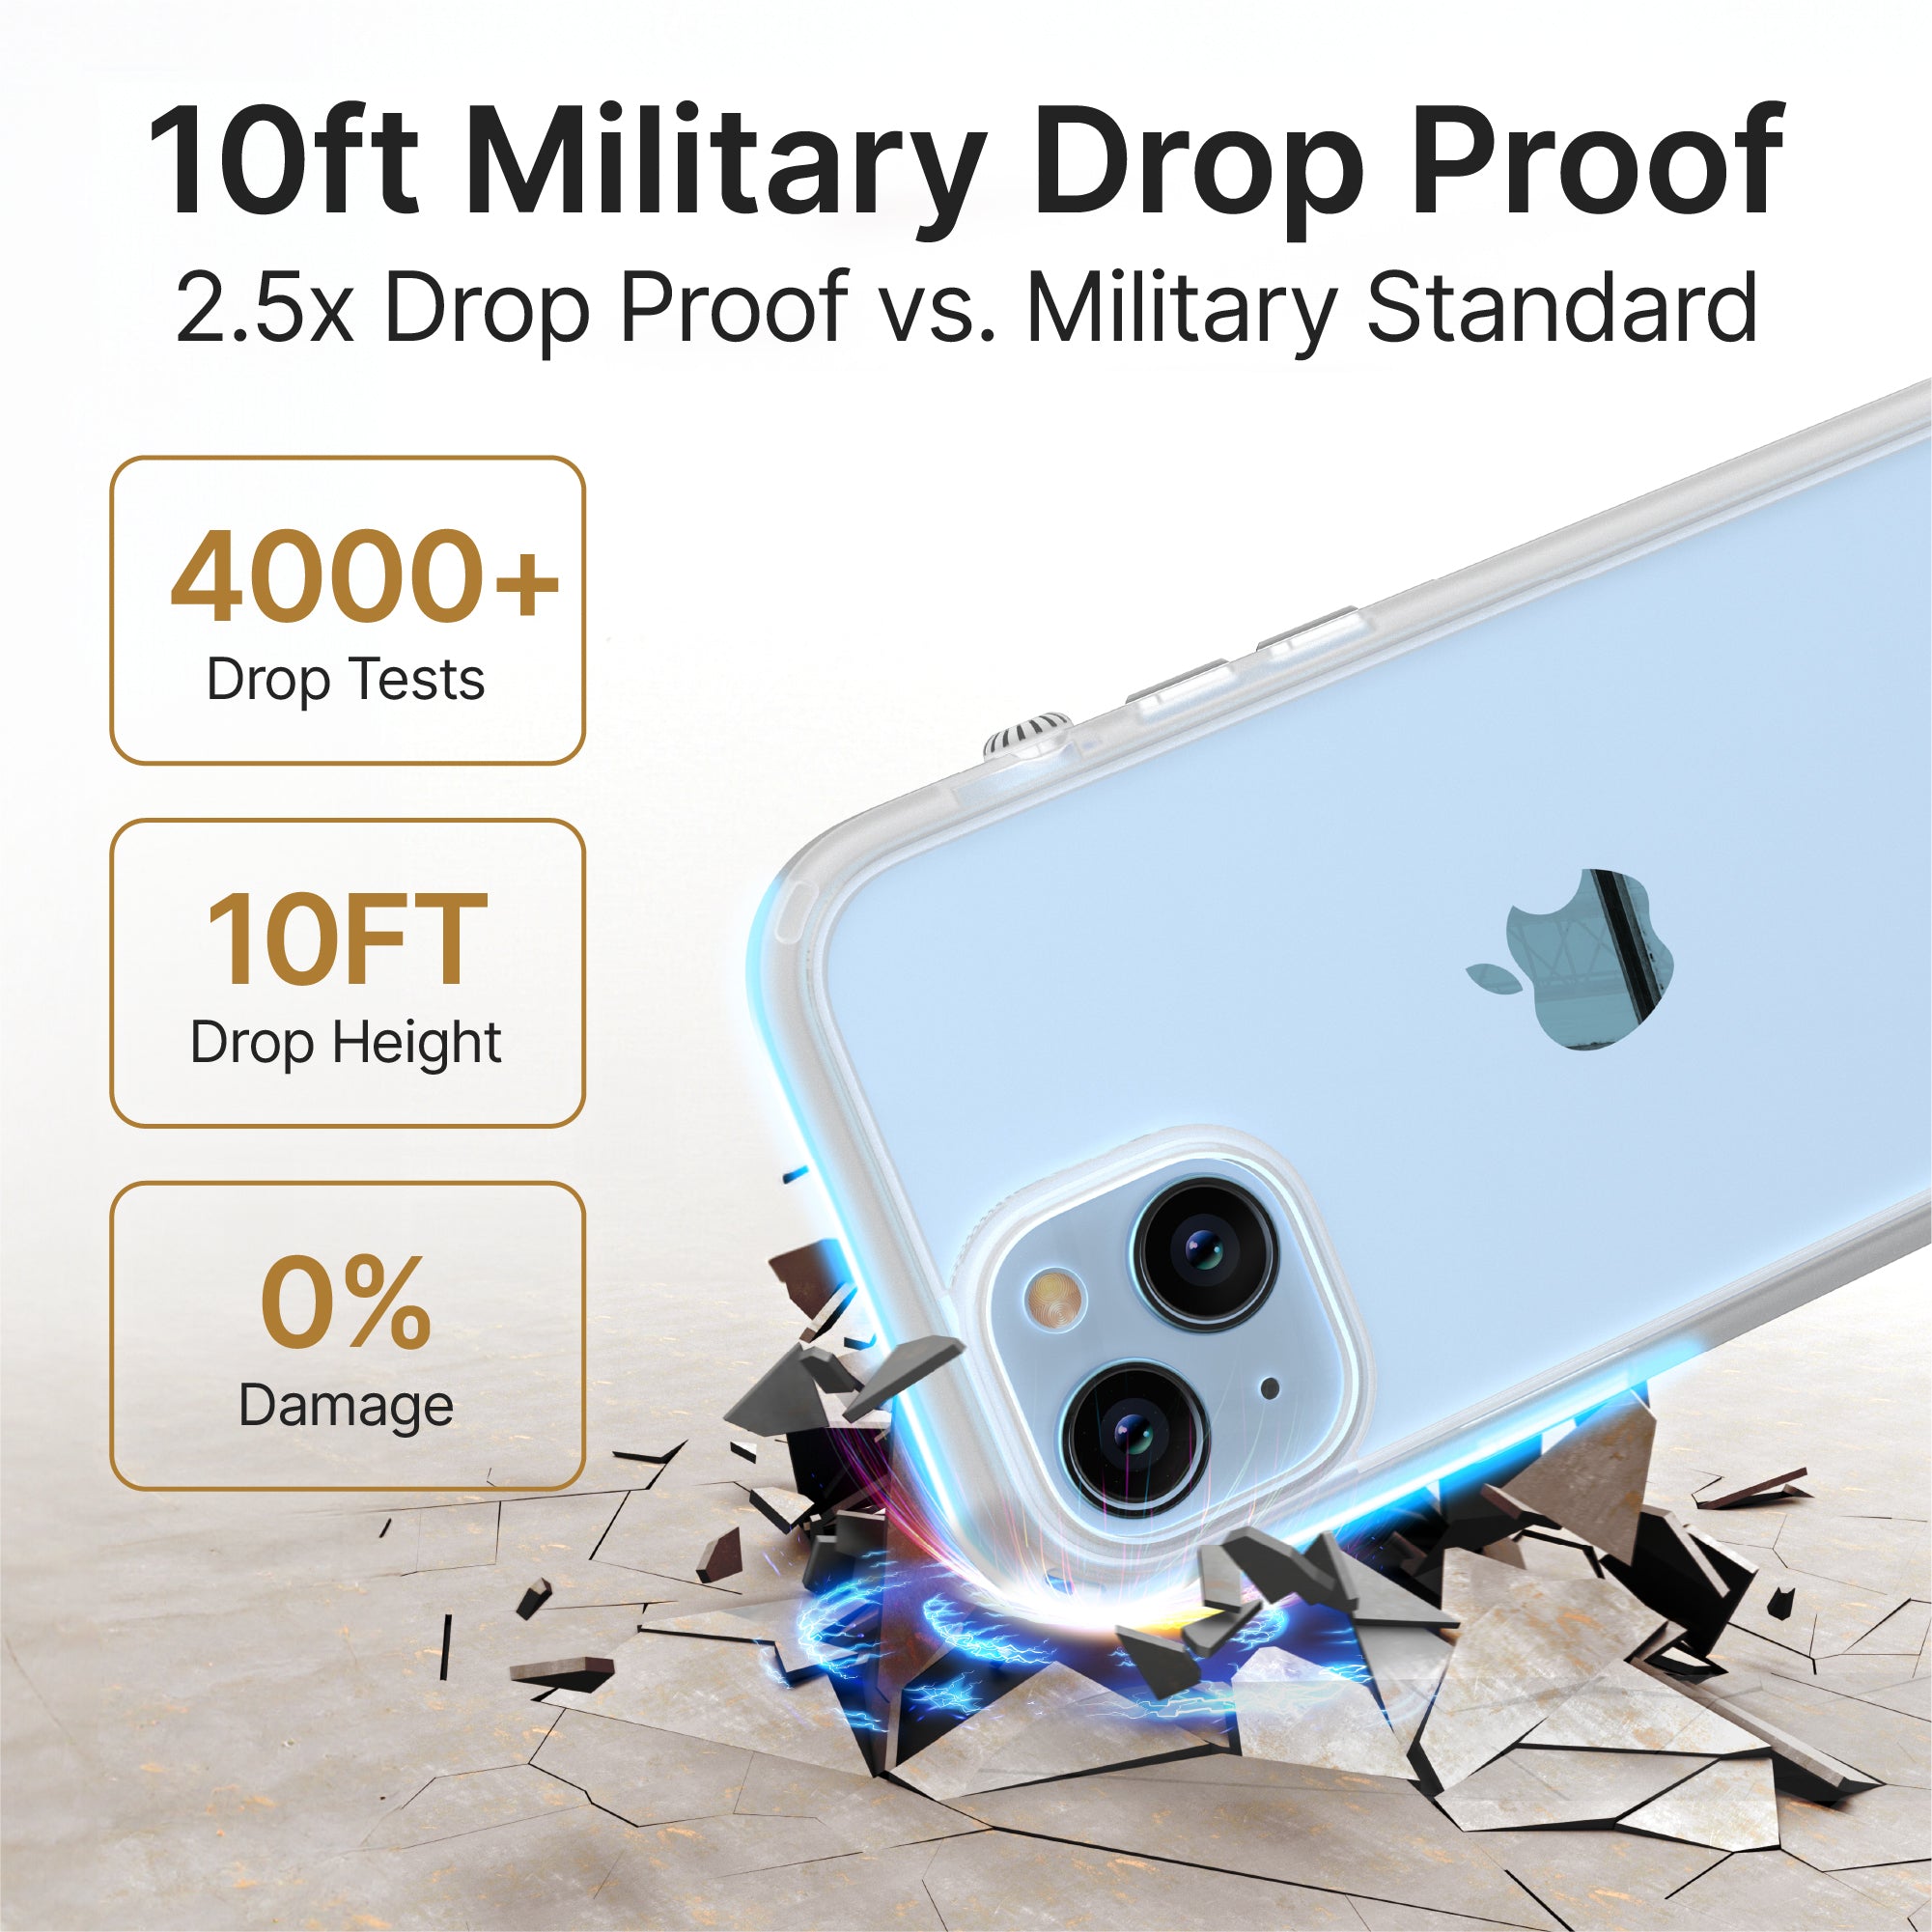 Catalyst iphone 15 series influence case iphone 15 plus in clear colorway showing the durability of the case text reads 10ft military drop proof 2.5 x drop proof vs. military standard 4000+ drop tests 10ft drop height 0% damage